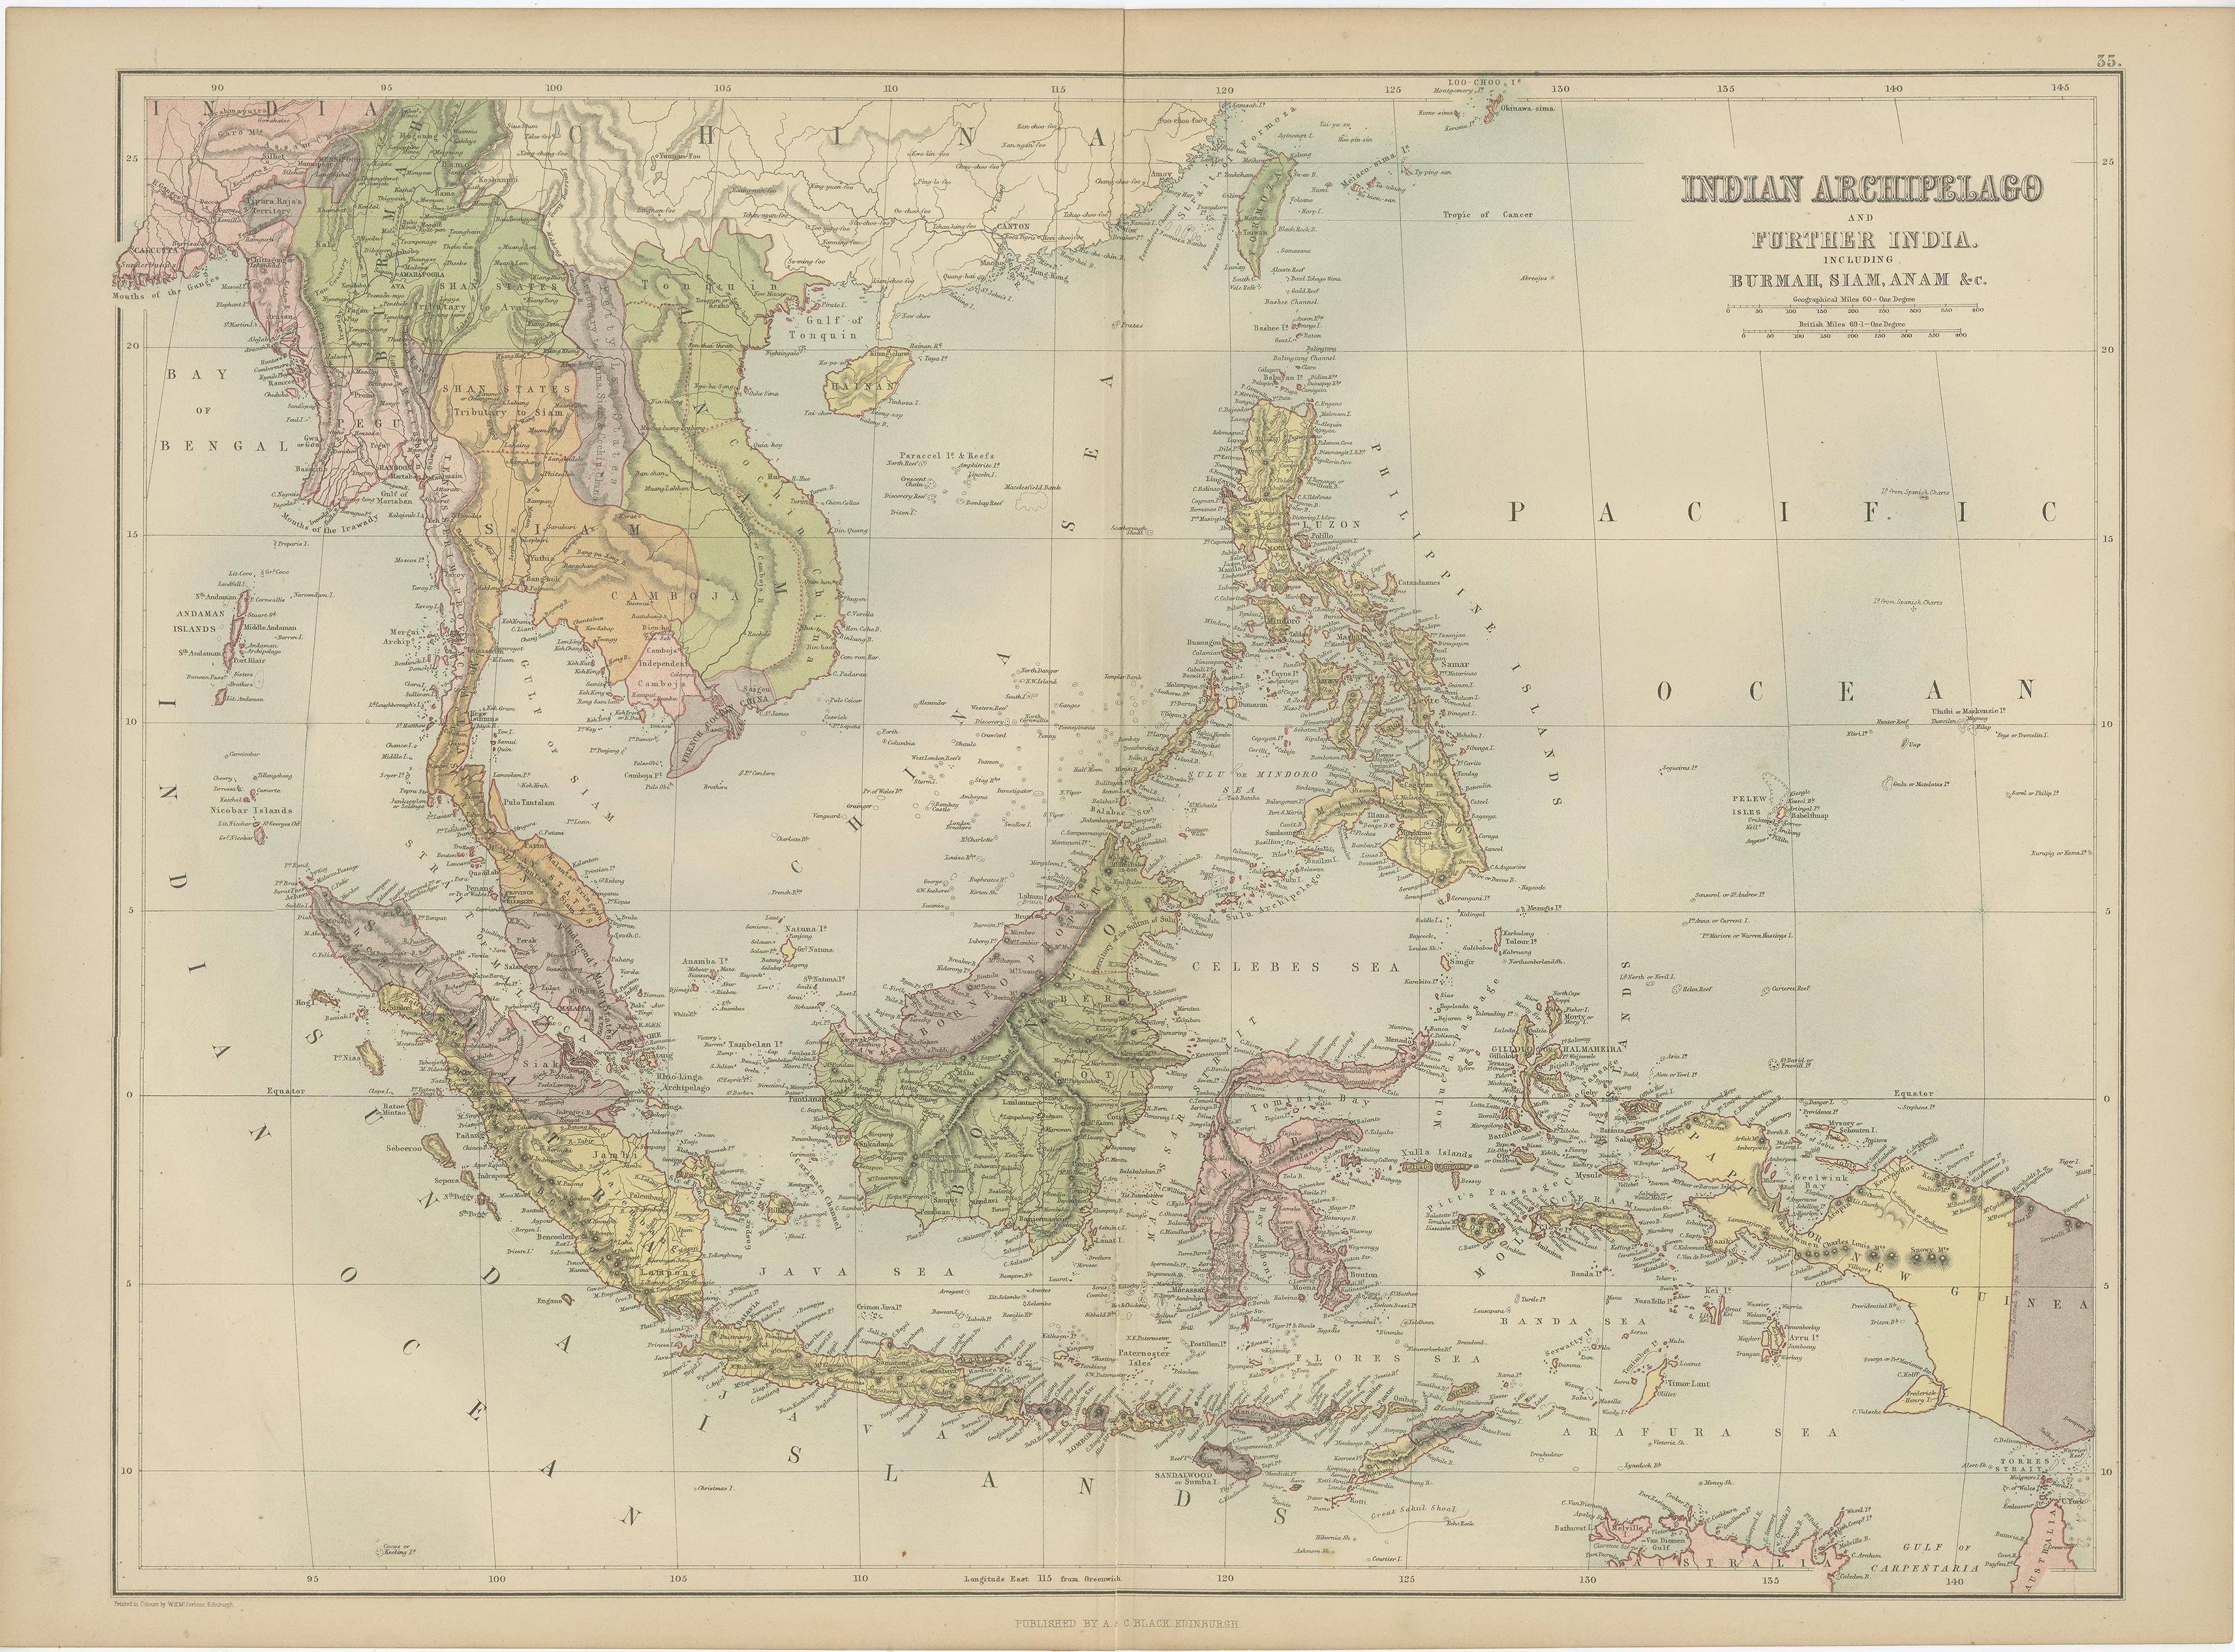 Antique map titled 'Indian Archipelago and Further India including Burmah, Siam, Anam &c'. Original antique map of Indian Archipelago and Further India. This map originates from ‘Black's General Atlas of The World’. Published by A & C. Black, 1870.